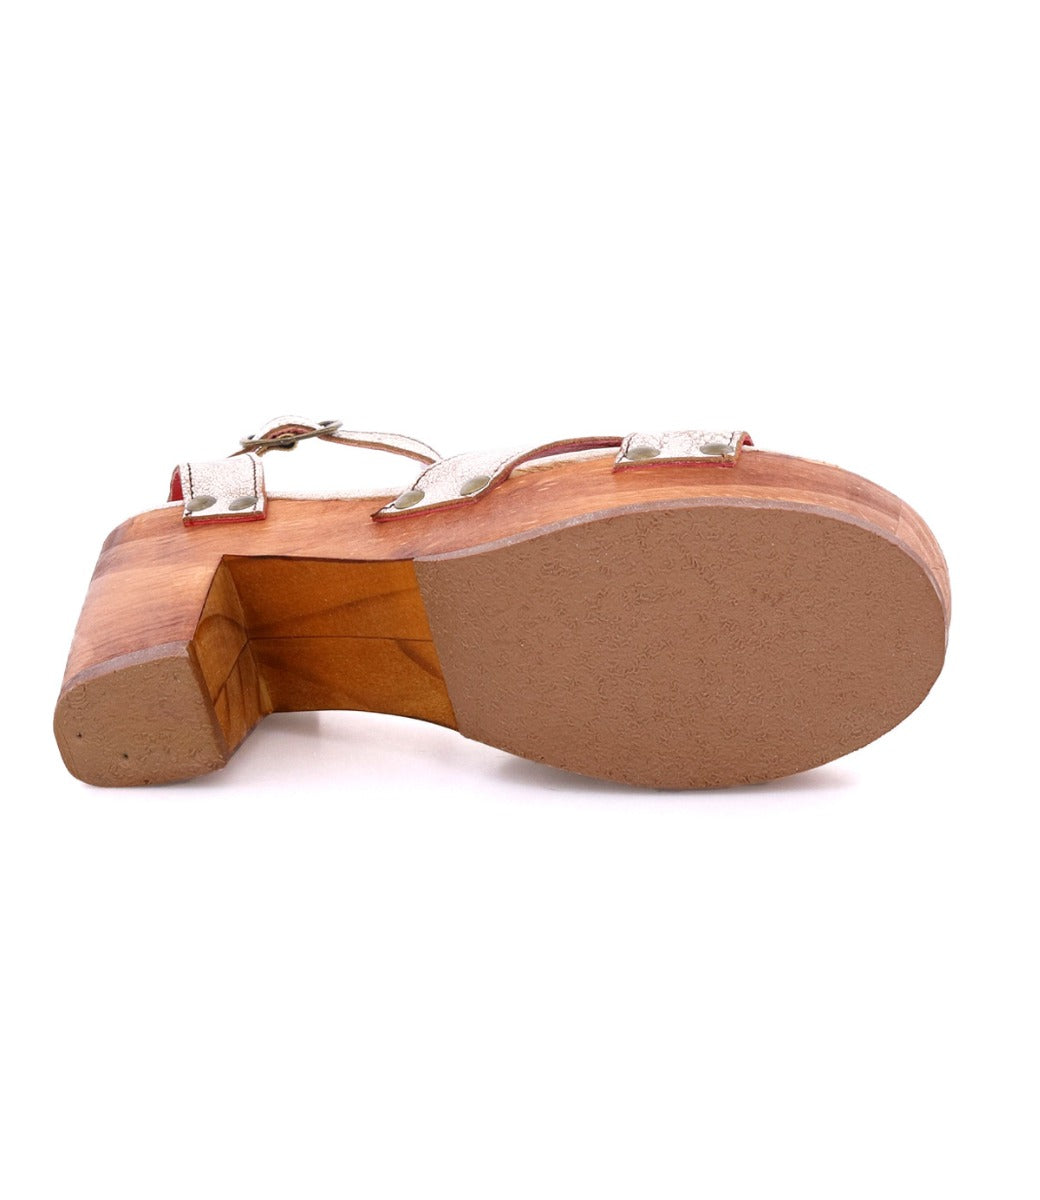 A pair of Kalah wooden sandals by Bed Stu on a white background.